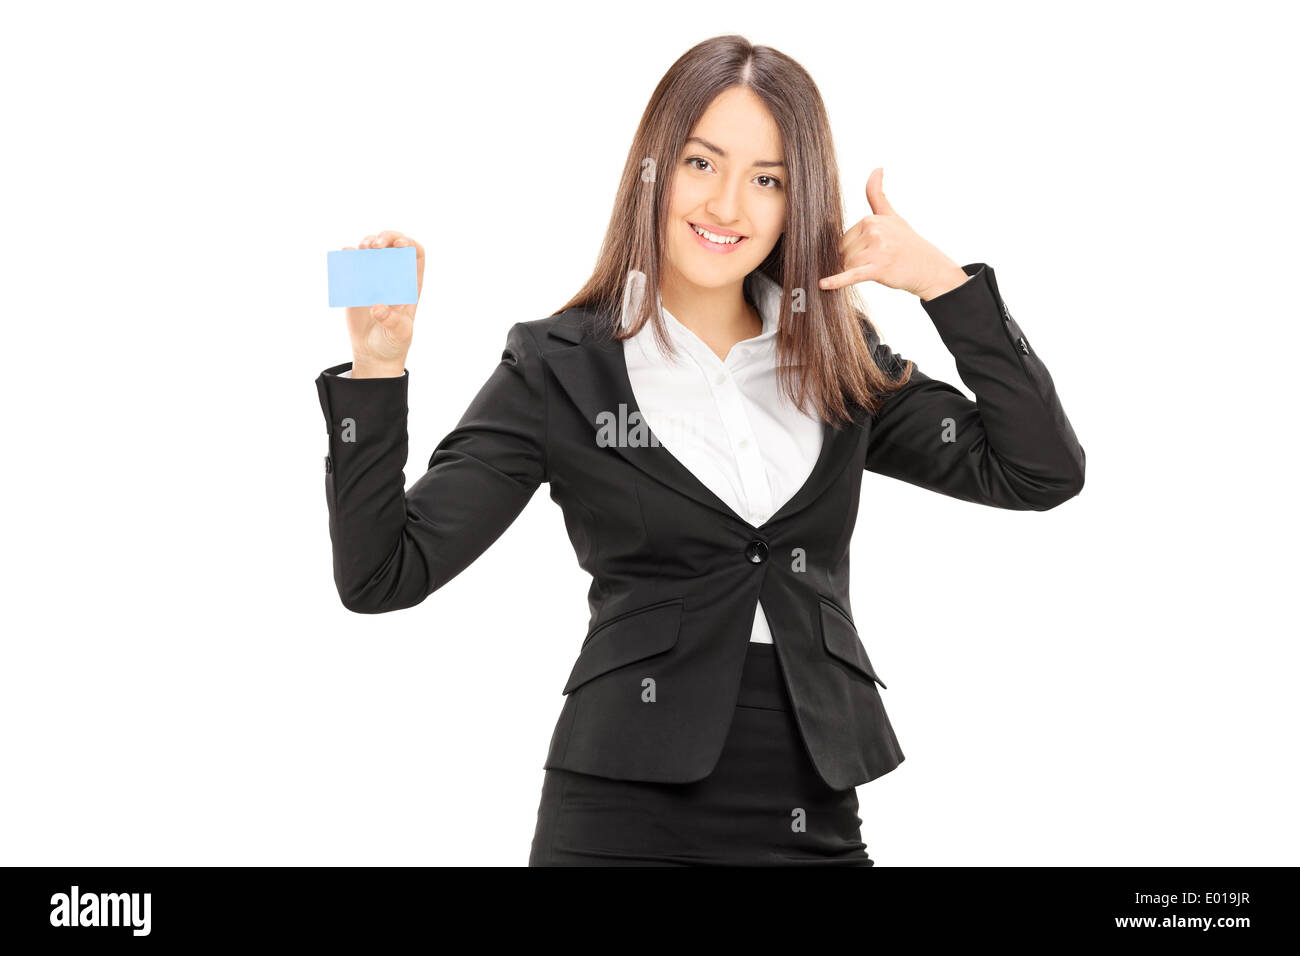 Businesswoman holding a blank blue card Stock Photo